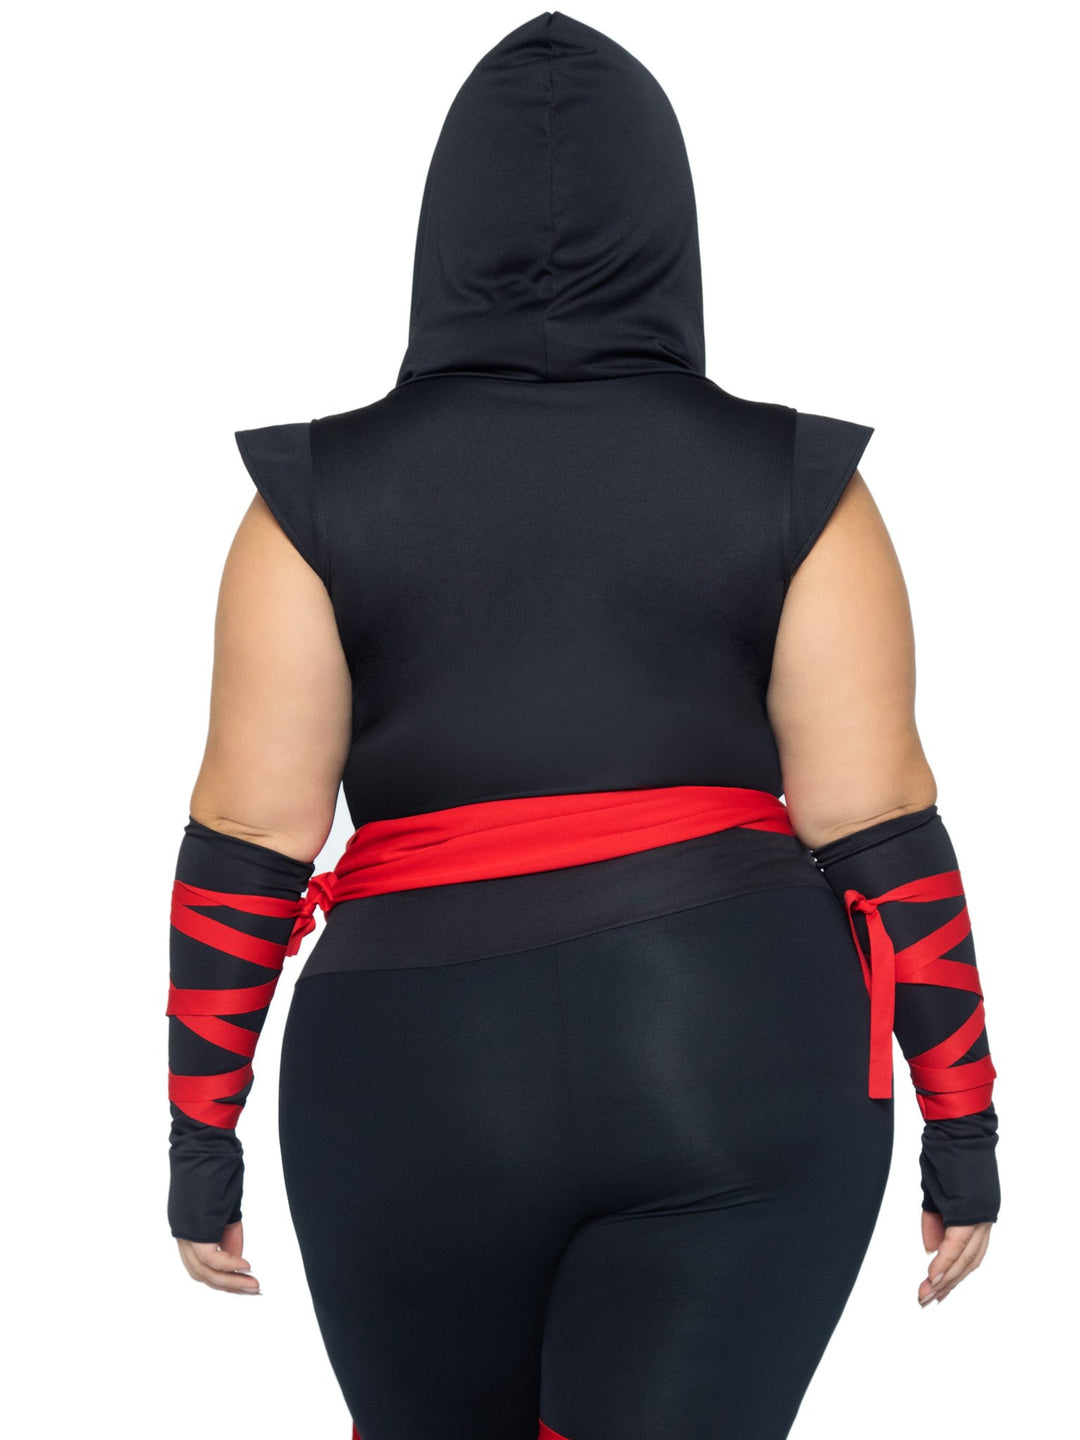 Deadly Ninja Hooded Plunging Plus Catsuit with Attached Leg Wraps and Mask